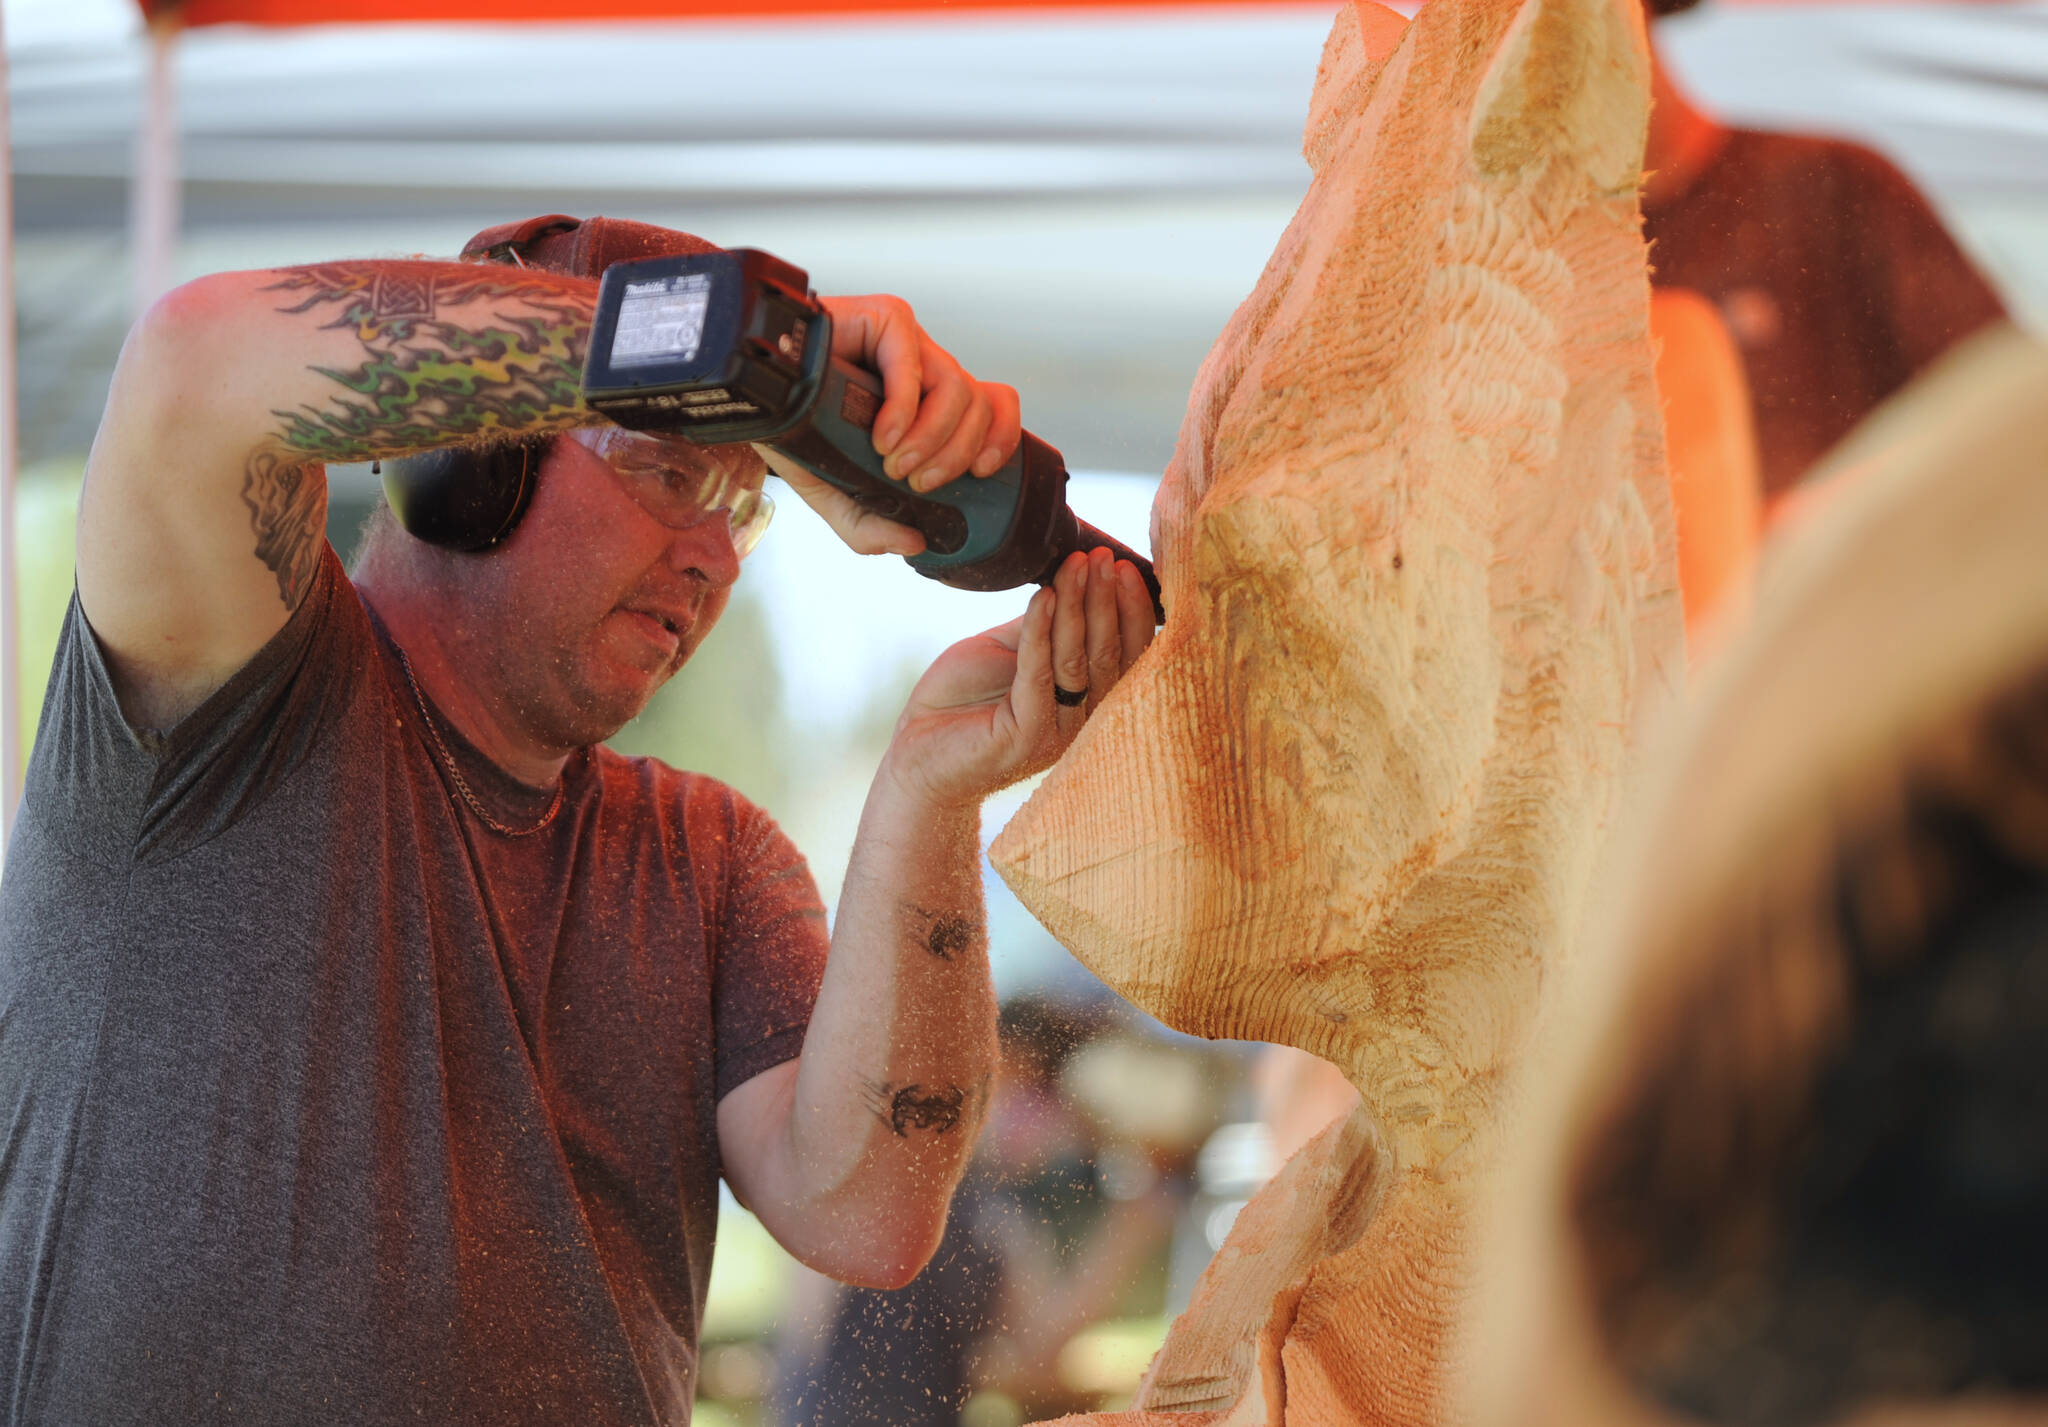 Sequim Gazette photo by Michael Dashiell / Nick Bielby of the Port Angeles-based Nicklby Wood Carving, works on a large bear sculpture at the Sequim Irrigation Festival Logging Show on May 12.